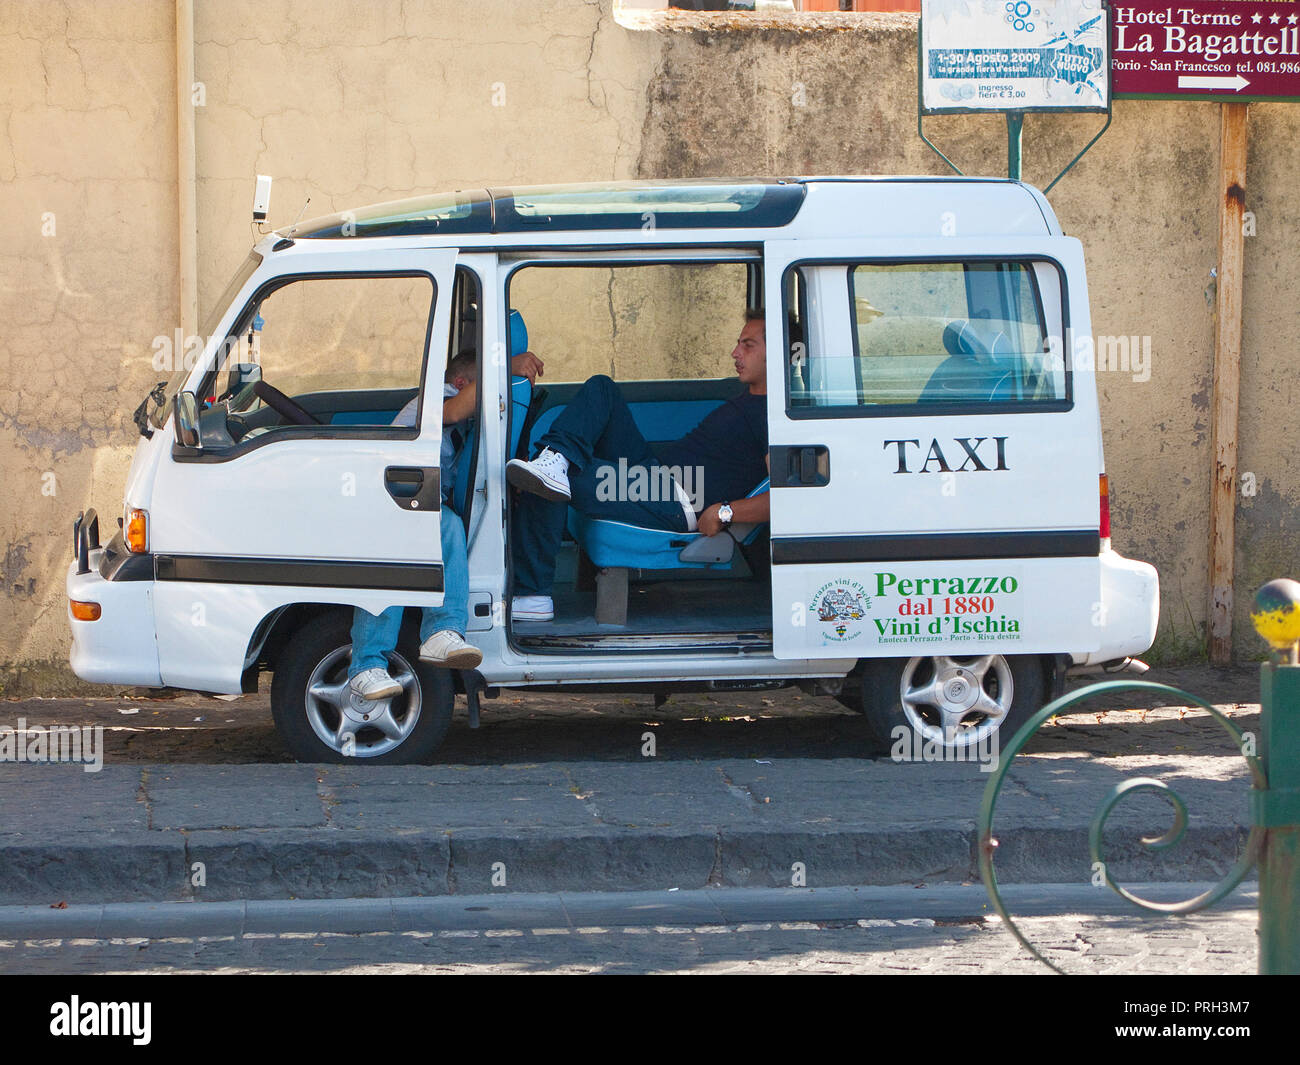 Taxi driver in a minivan waiting for clients, Ischia Ponte, Ischia island, Gulf of Neapel, Italy Stock Photo